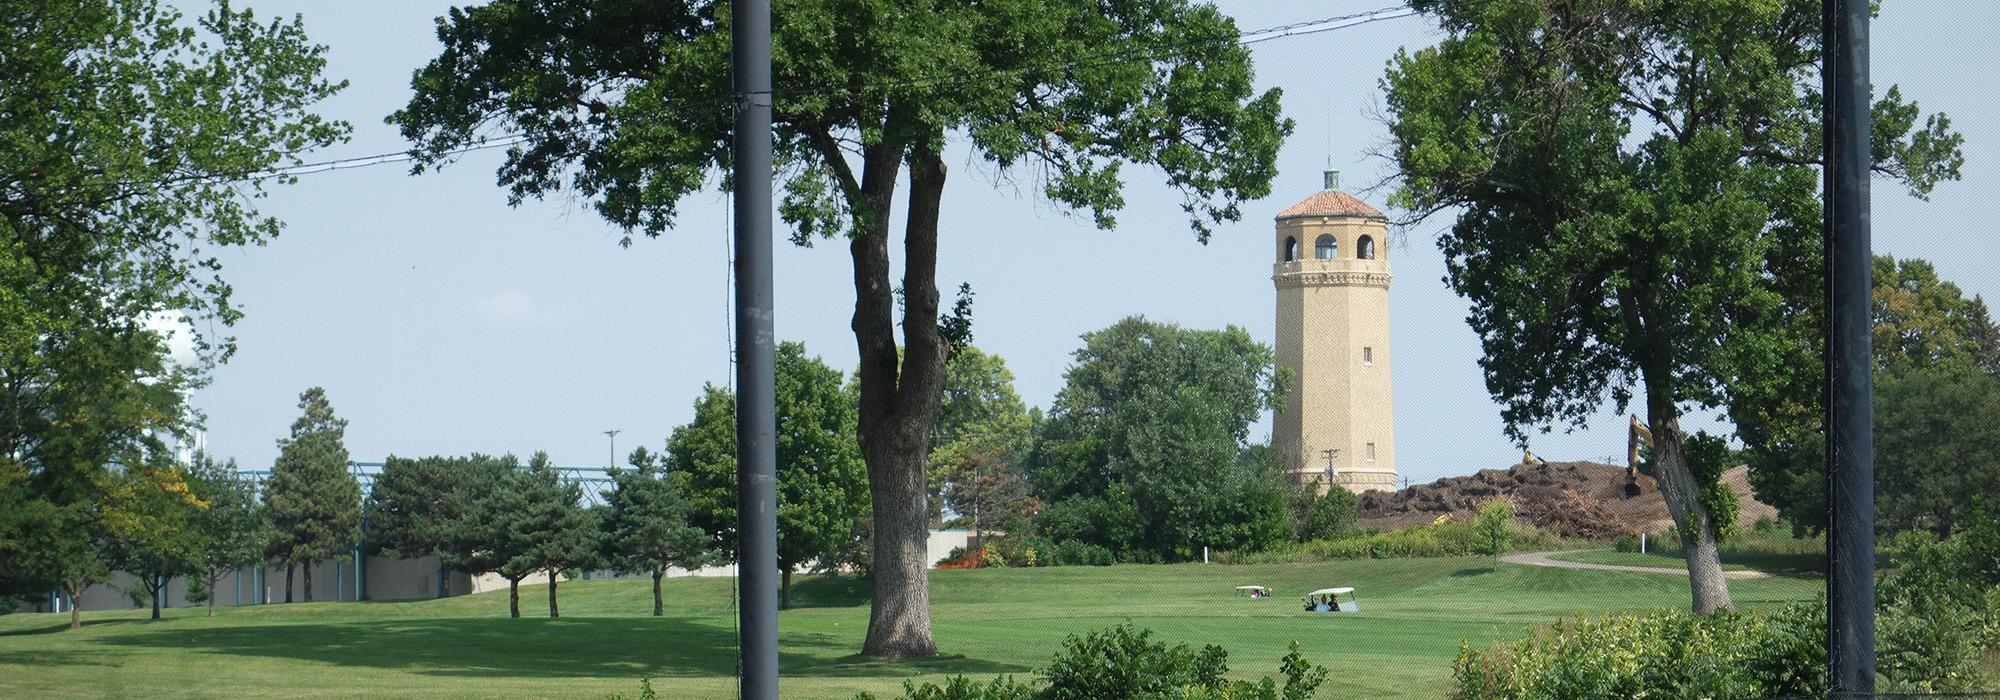 HIghland Park Water Tower, St. Paul, MN